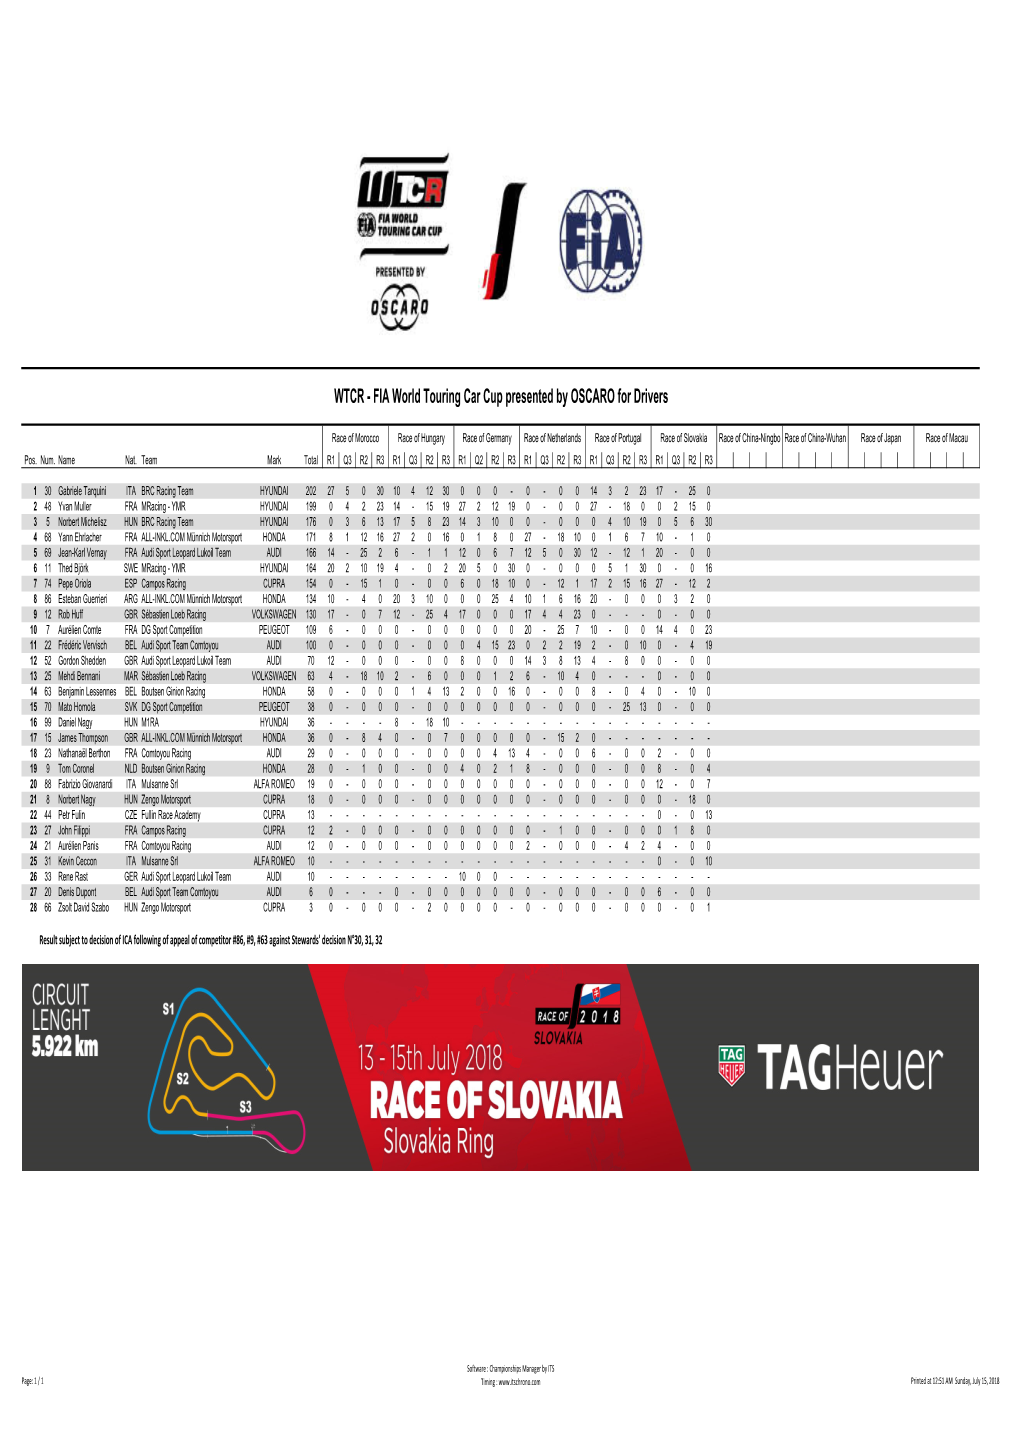 WTCR - FIA World Touring Car Cup Presented by OSCARO for Drivers